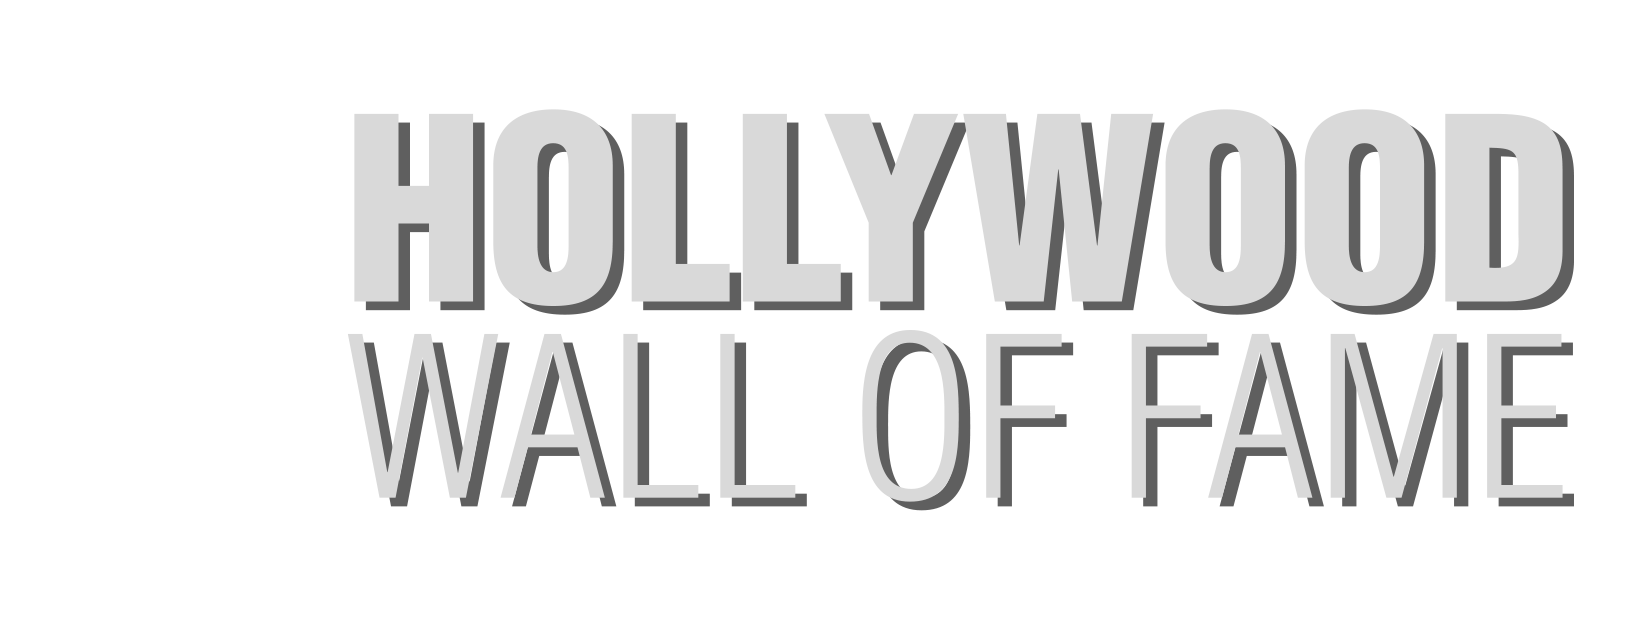 Hollywood Wall of Fame